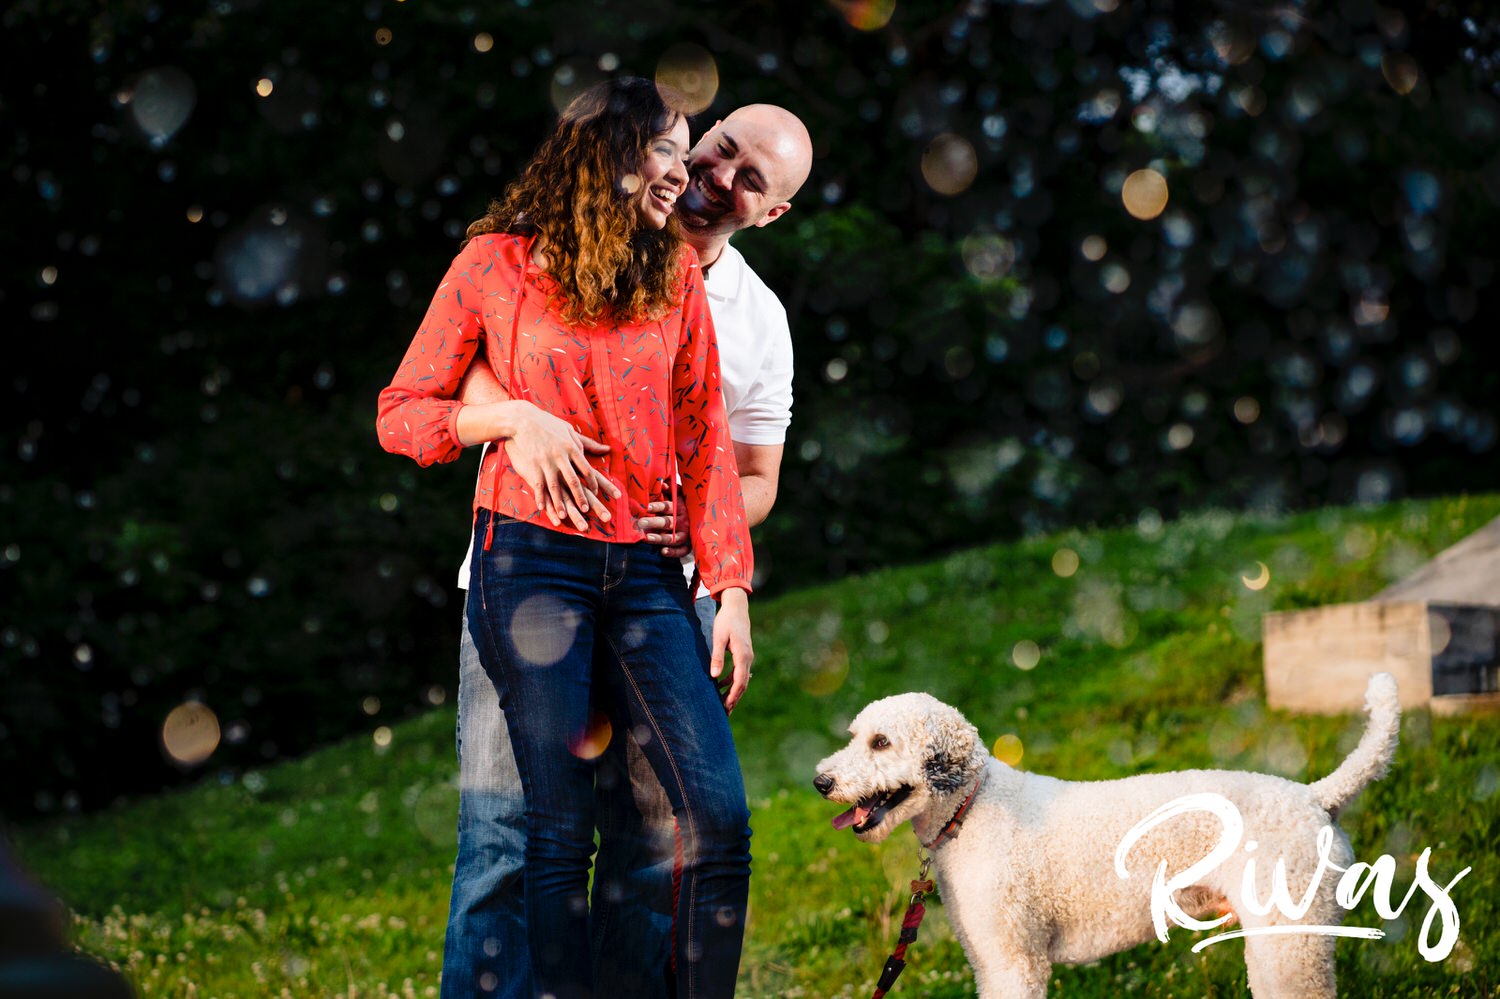 A silly, colorful picture of an engaged couple sharing a laugh and embrace as they look down at their white poodle at their feet during their engagement session. 